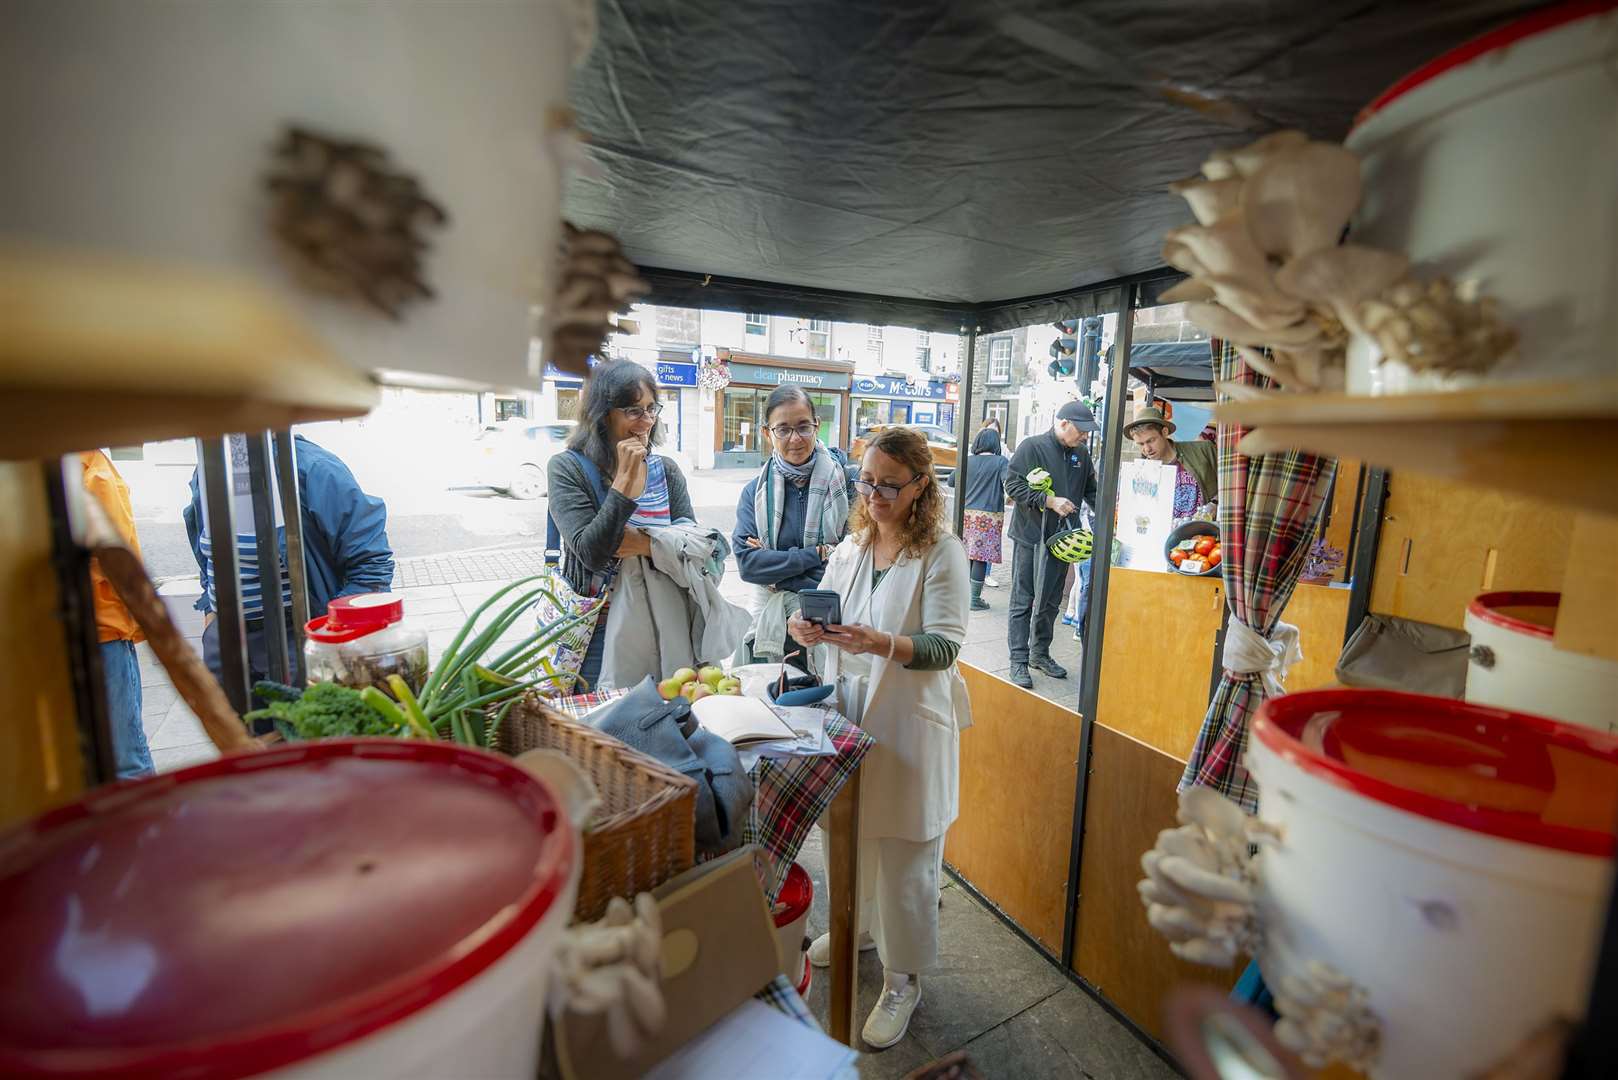 The pop-up Makers Merkat on High Street. Picture by Mark Richards